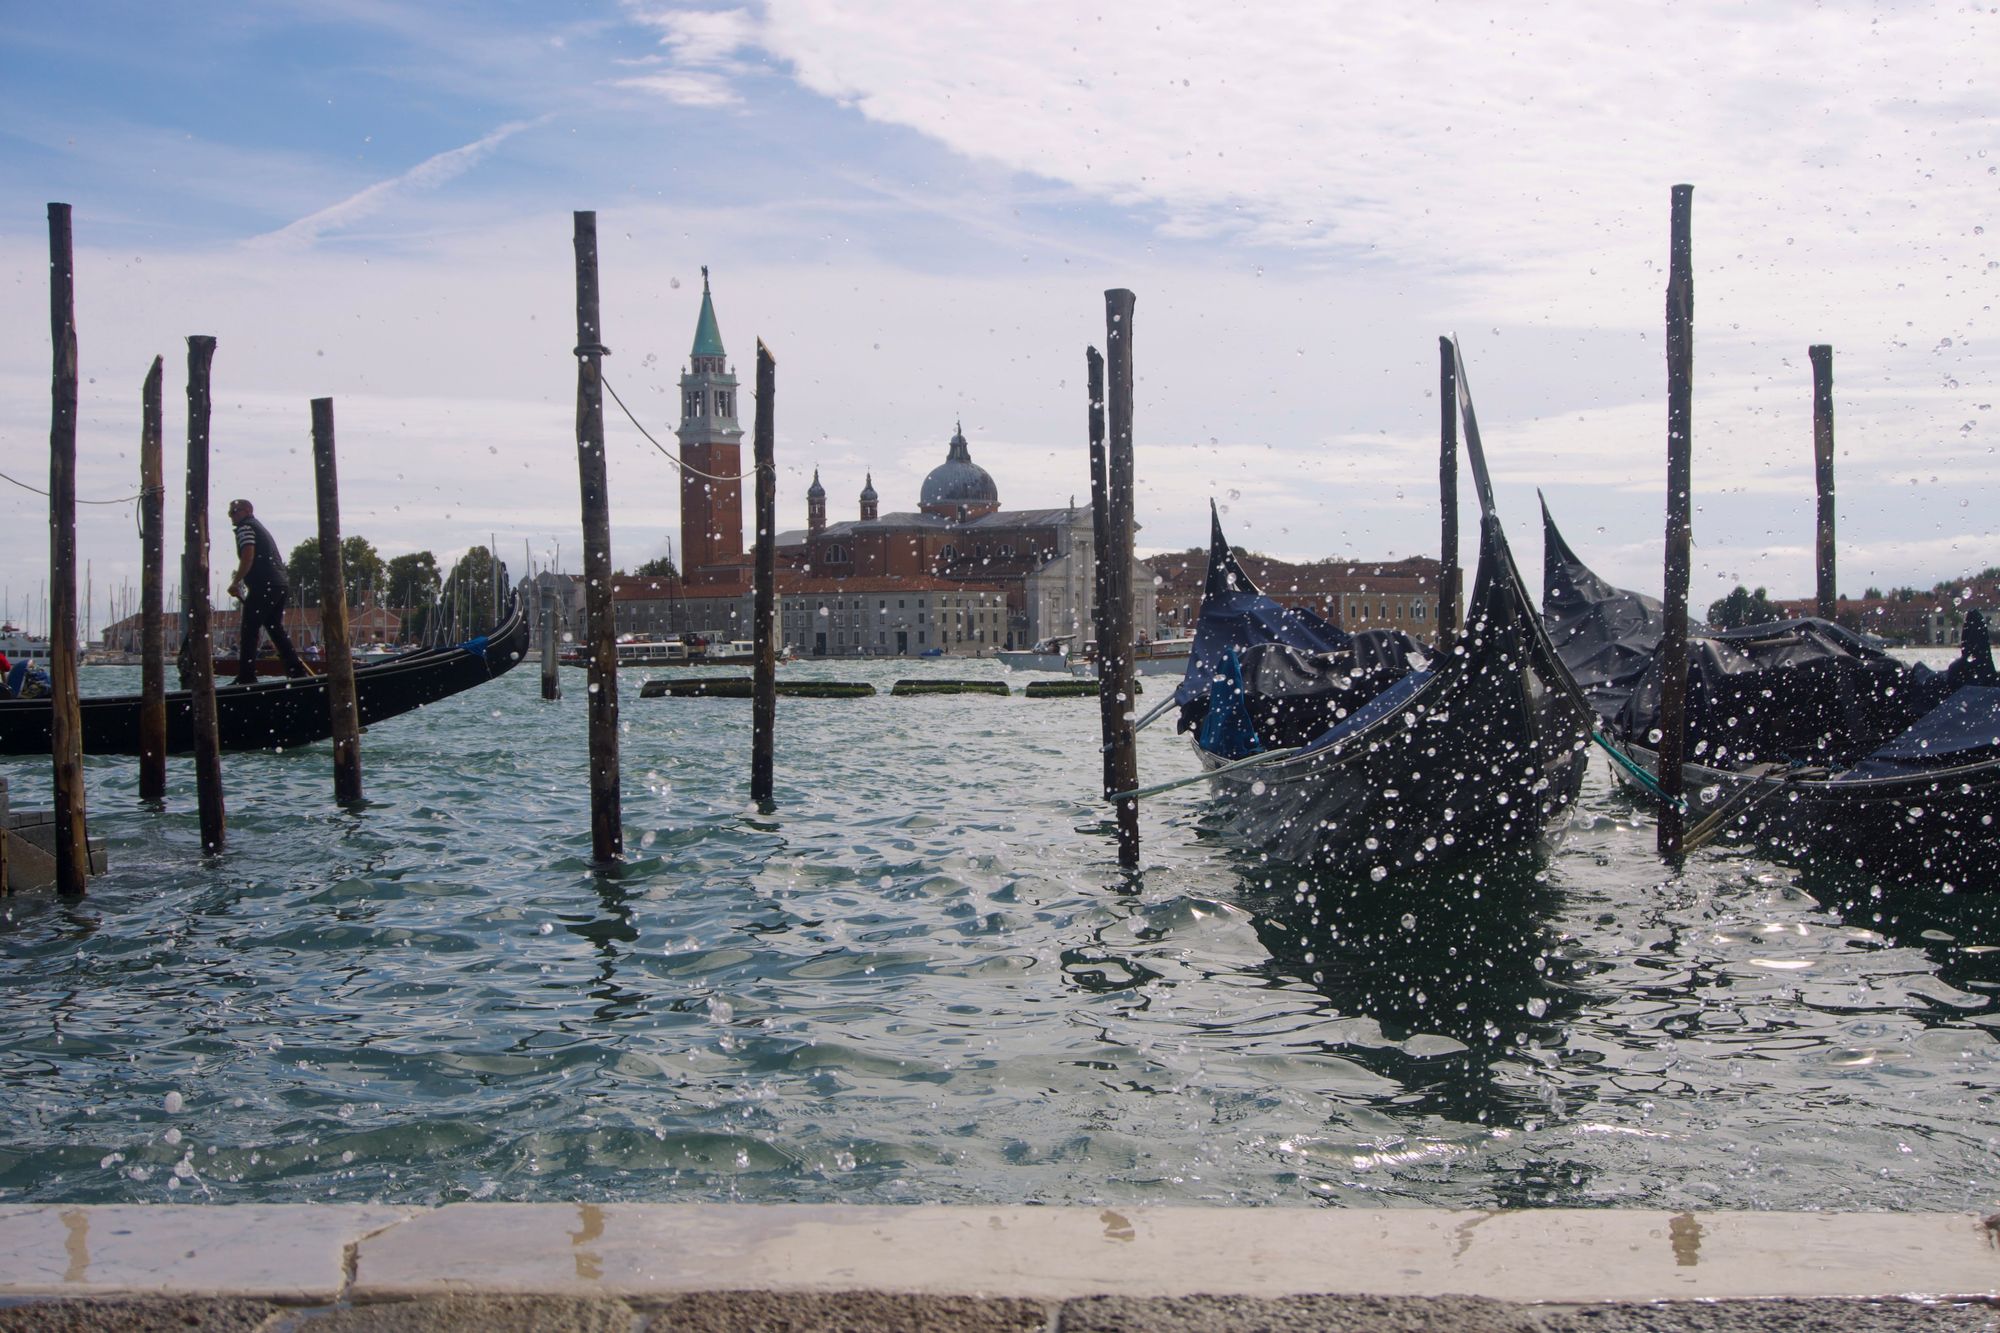 Gondolas moored against long wooden poles bob up and down in the Venetian lagoon, which whips up in spray before us as we stand perilously close to the edge (the turquoise waters almost spilling over.) In the background, we see San Giorgio Maggiore's dome and tower, obstinate.